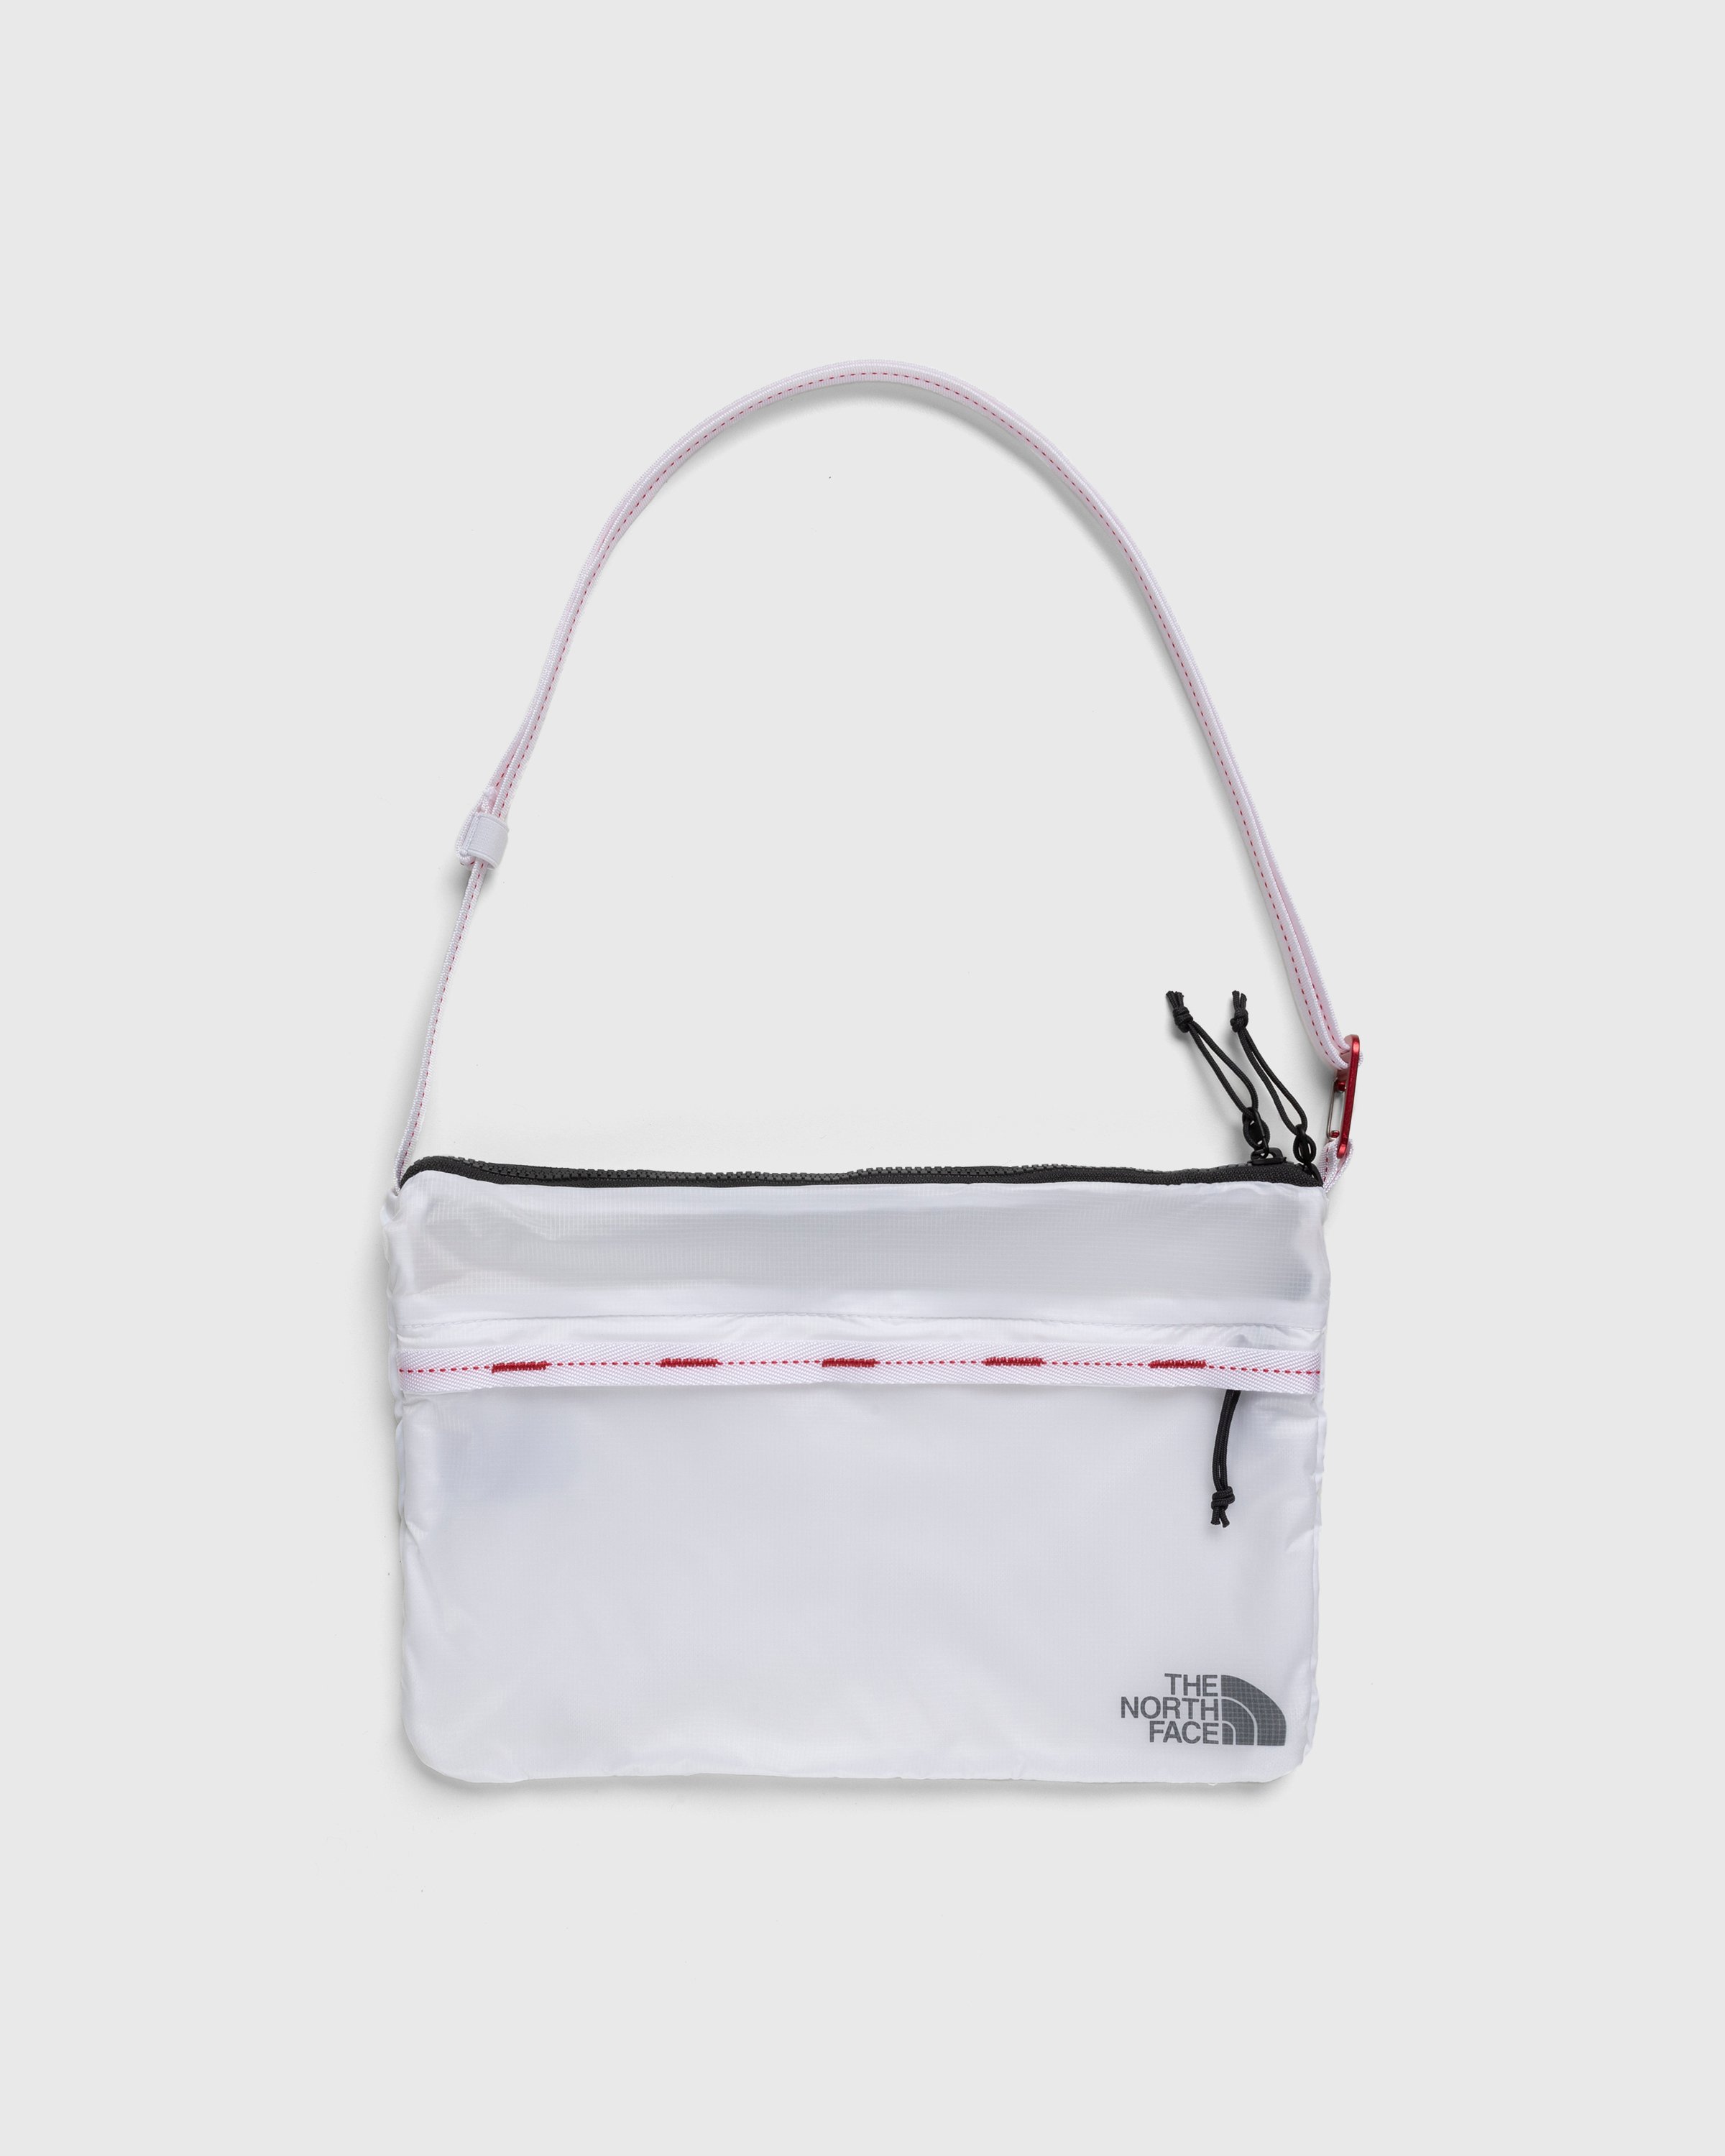 The North Face - Flyweight Shoulder Bag White/Asphalt Grey/Red - Accessories - White - Image 1